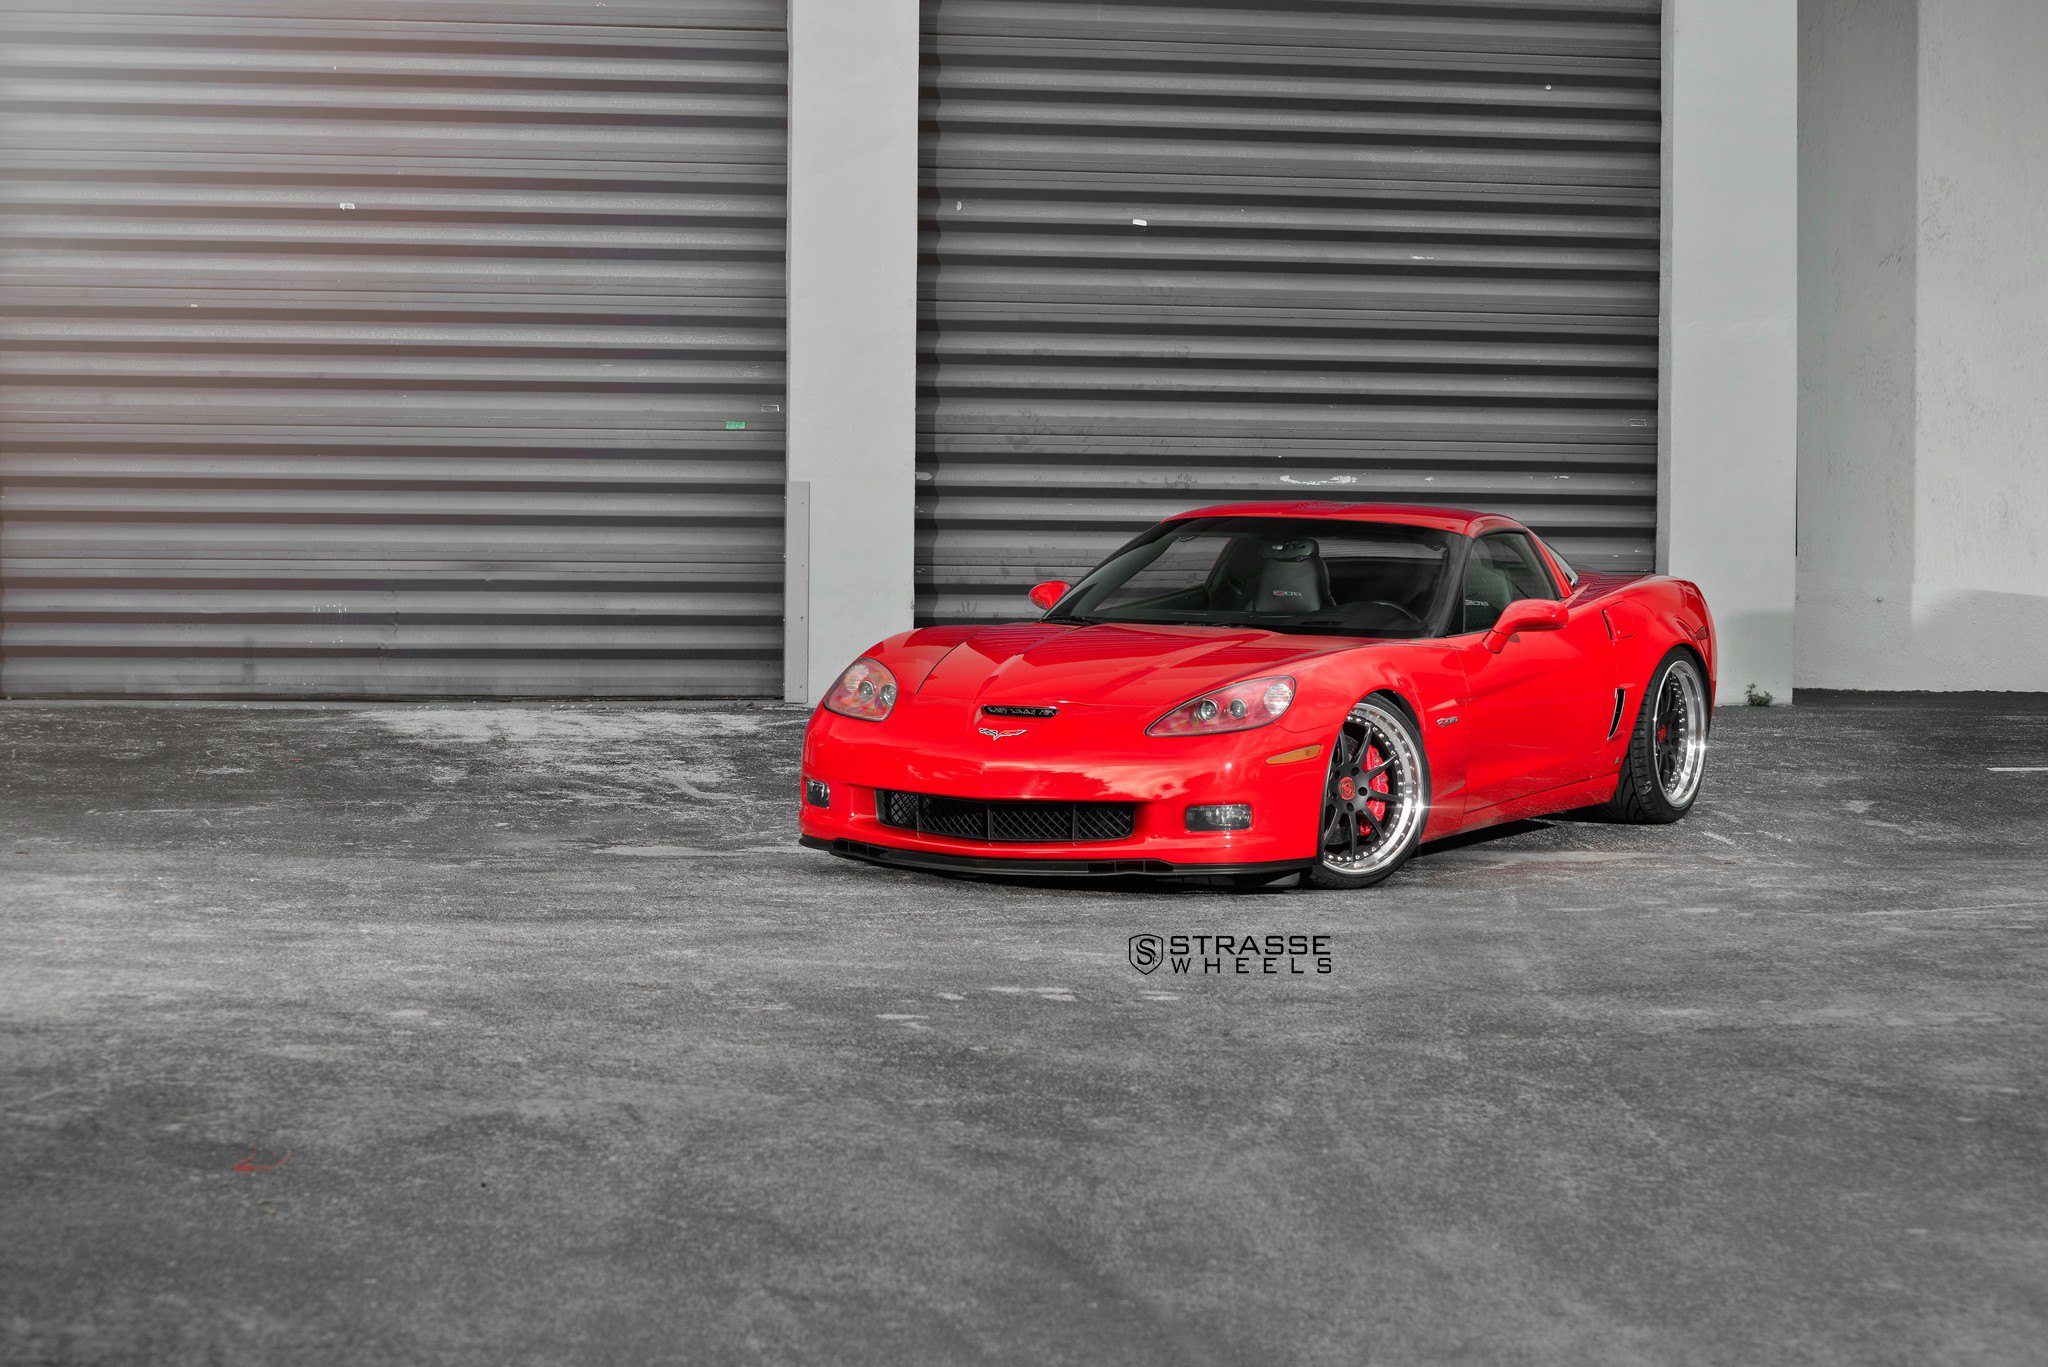 Red Chevy Corvette Z06 with Custom Headlights - Photo by Strasse Forged